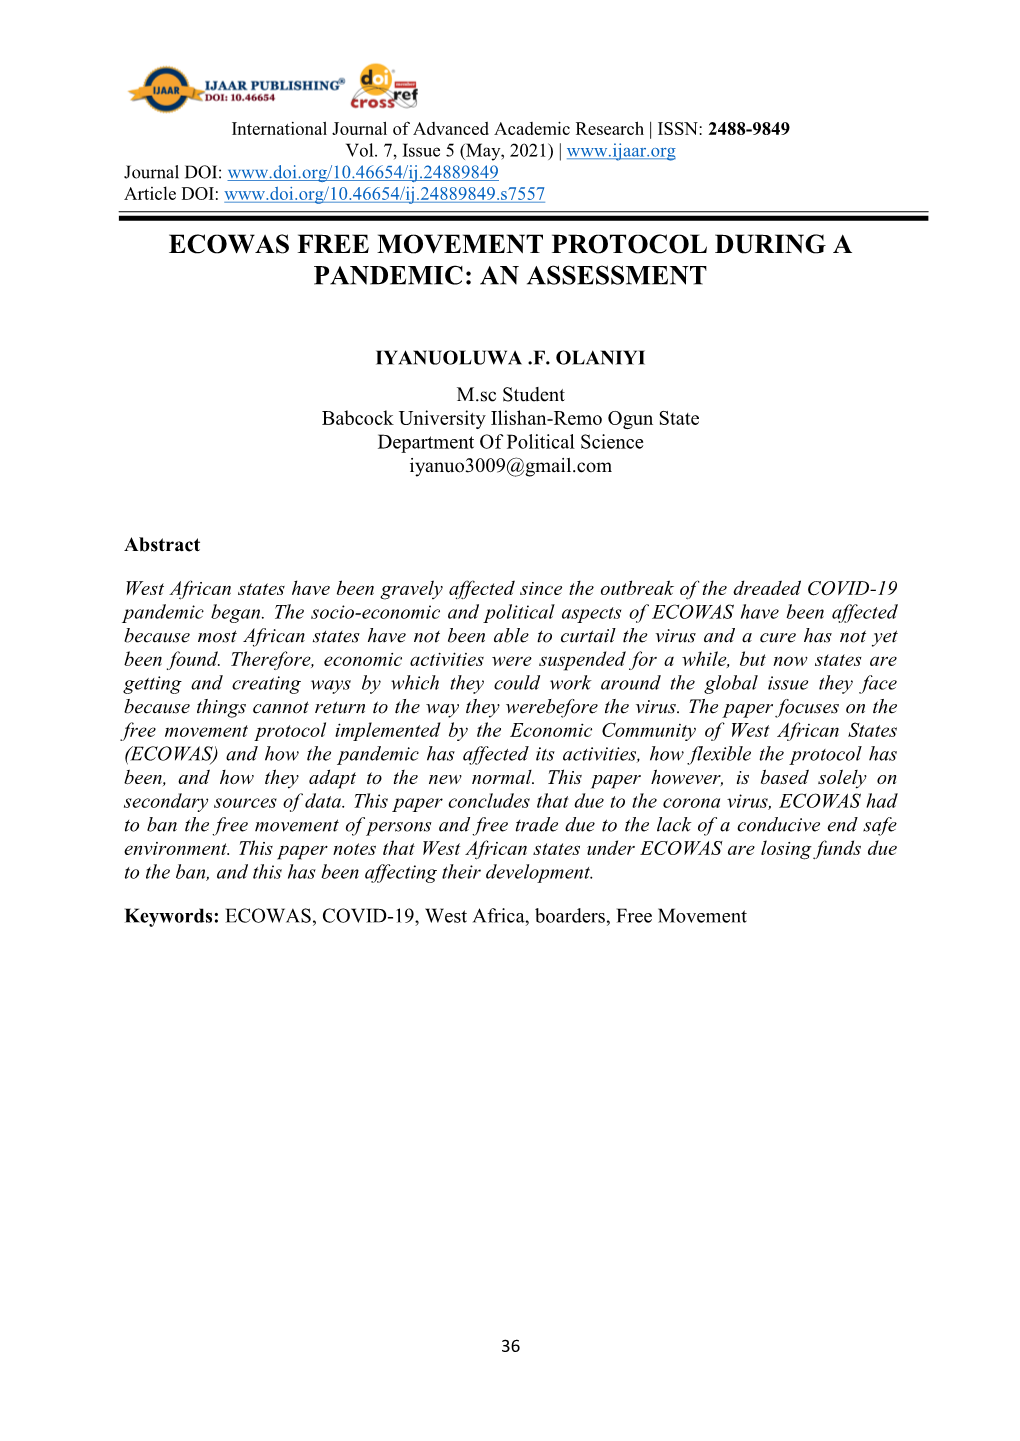 Ecowas Free Movement Protocol During a Pandemic: an Assessment